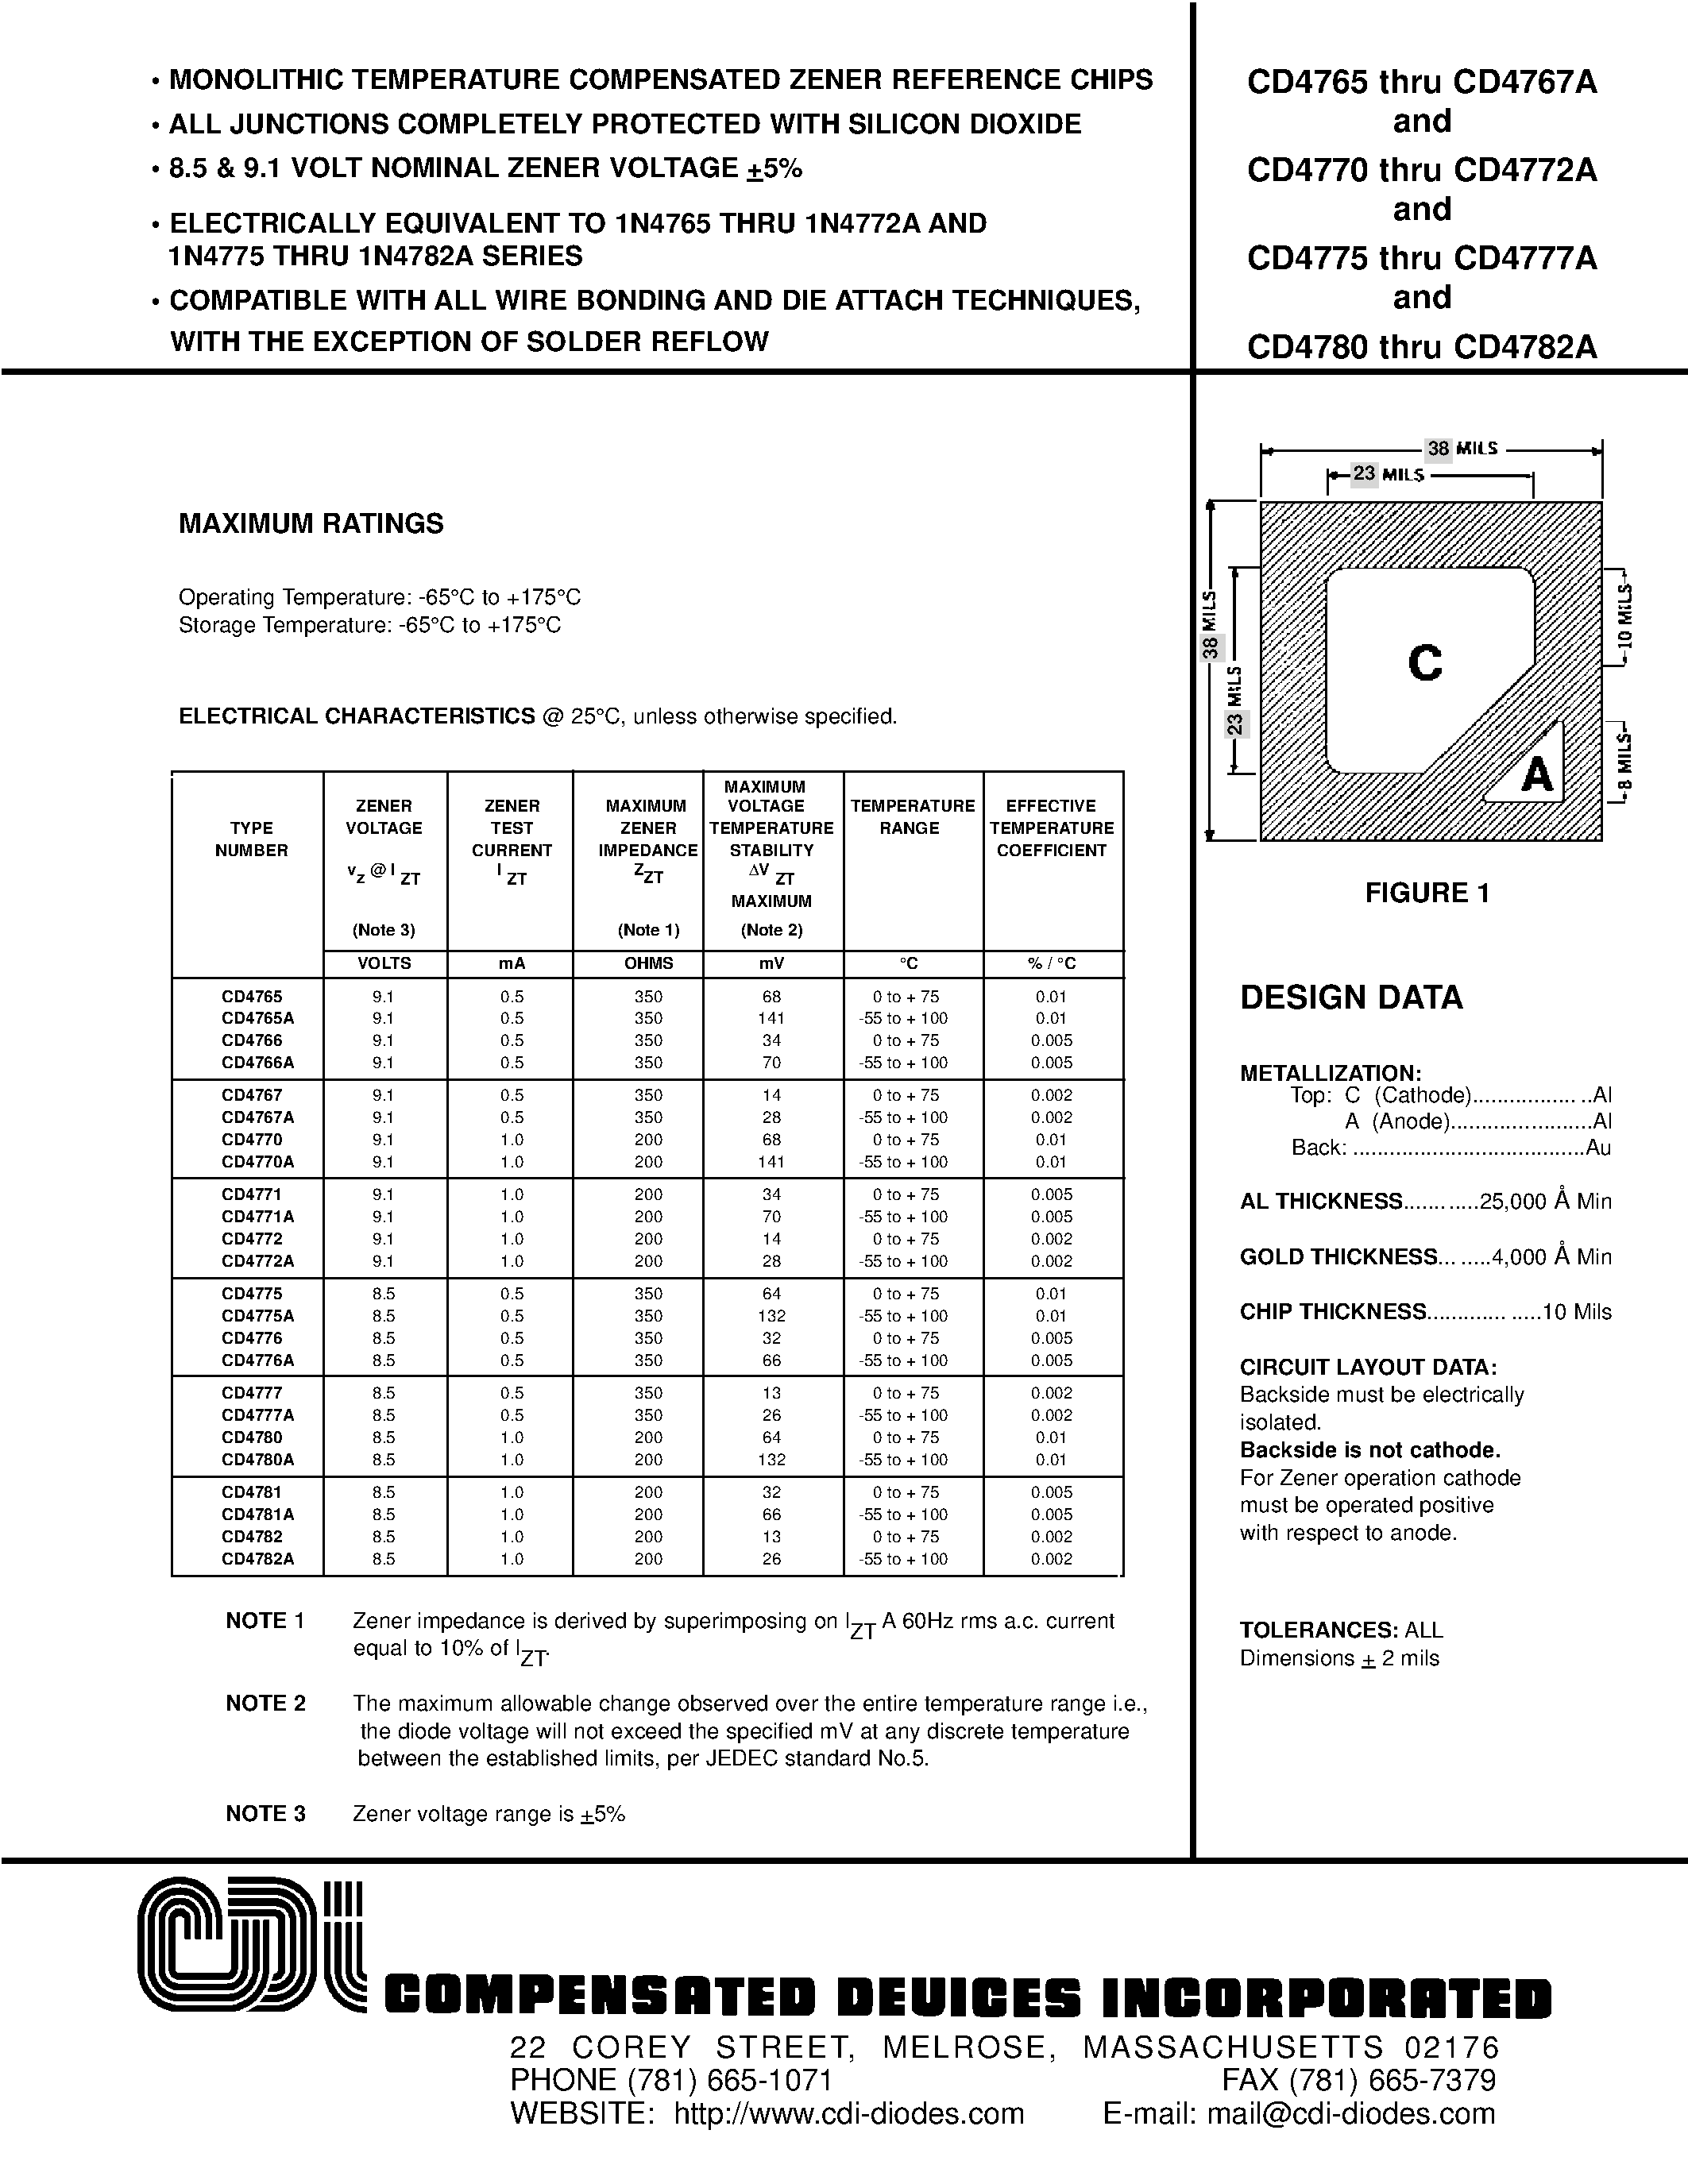 Datasheet CD4781A - MONOLITHIC TEMPERATURE COMPENSATED ZENER REFERENCE CHIPS page 1